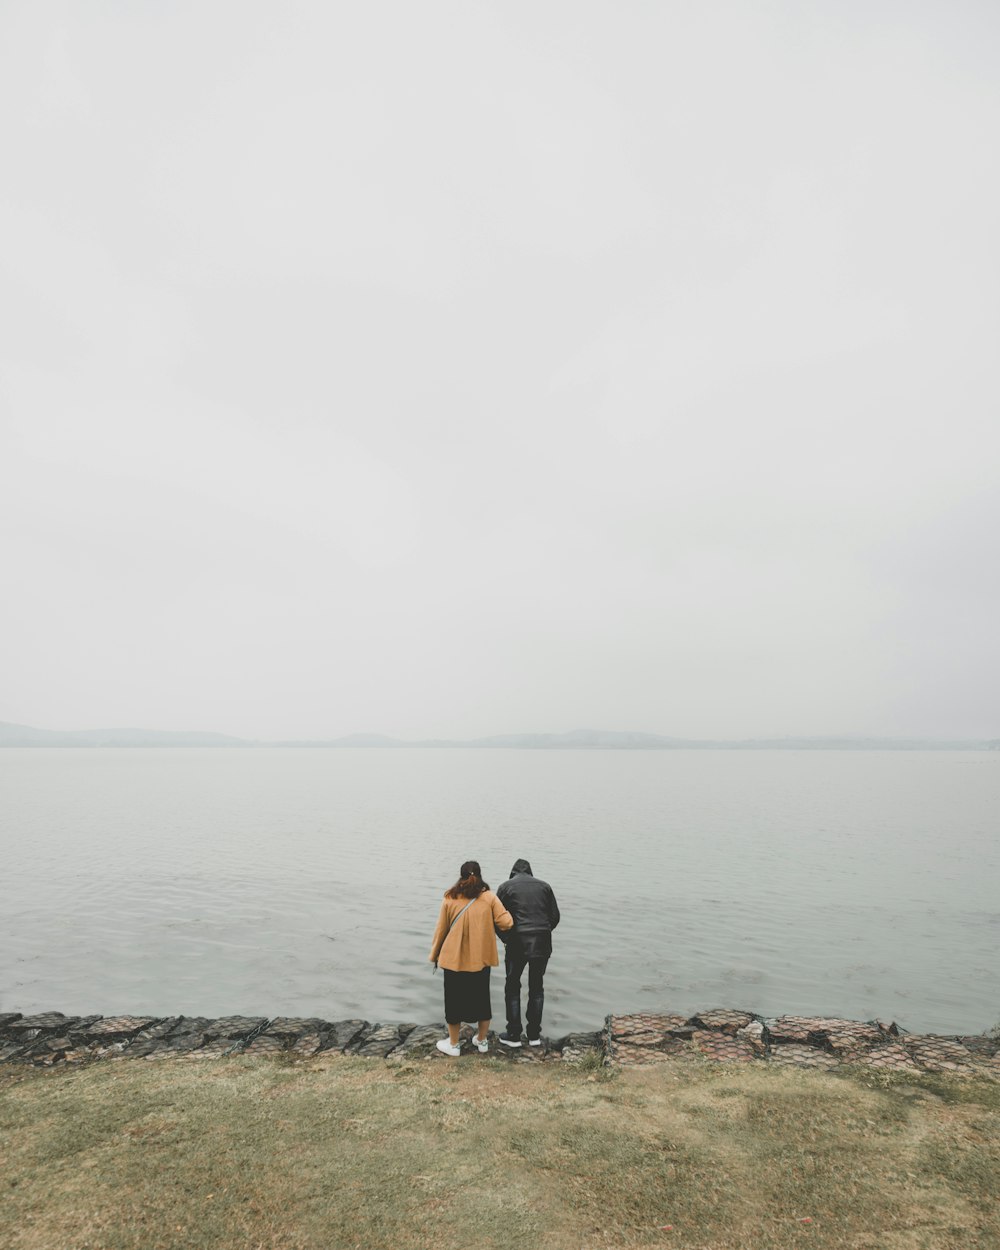 two person standing in front of body of water during daytime